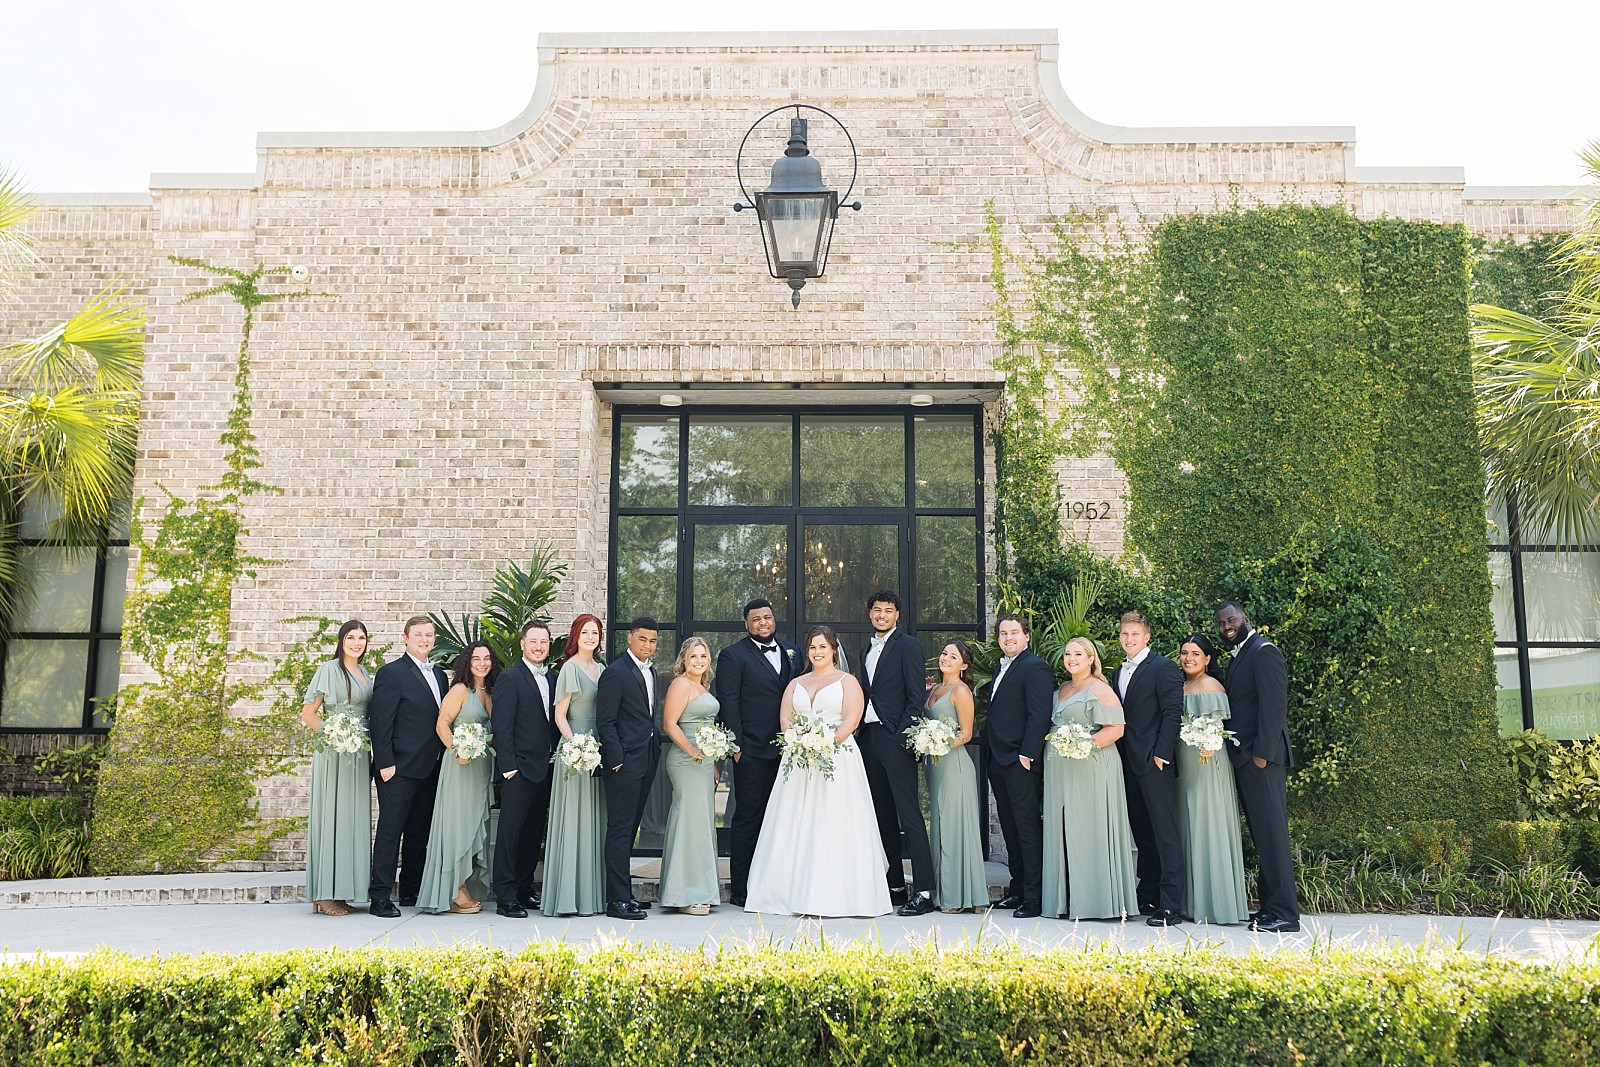 Sage green and black wedding party colors at Wrightsville Manor in Wilmington | North Carolina Wedding Photographer